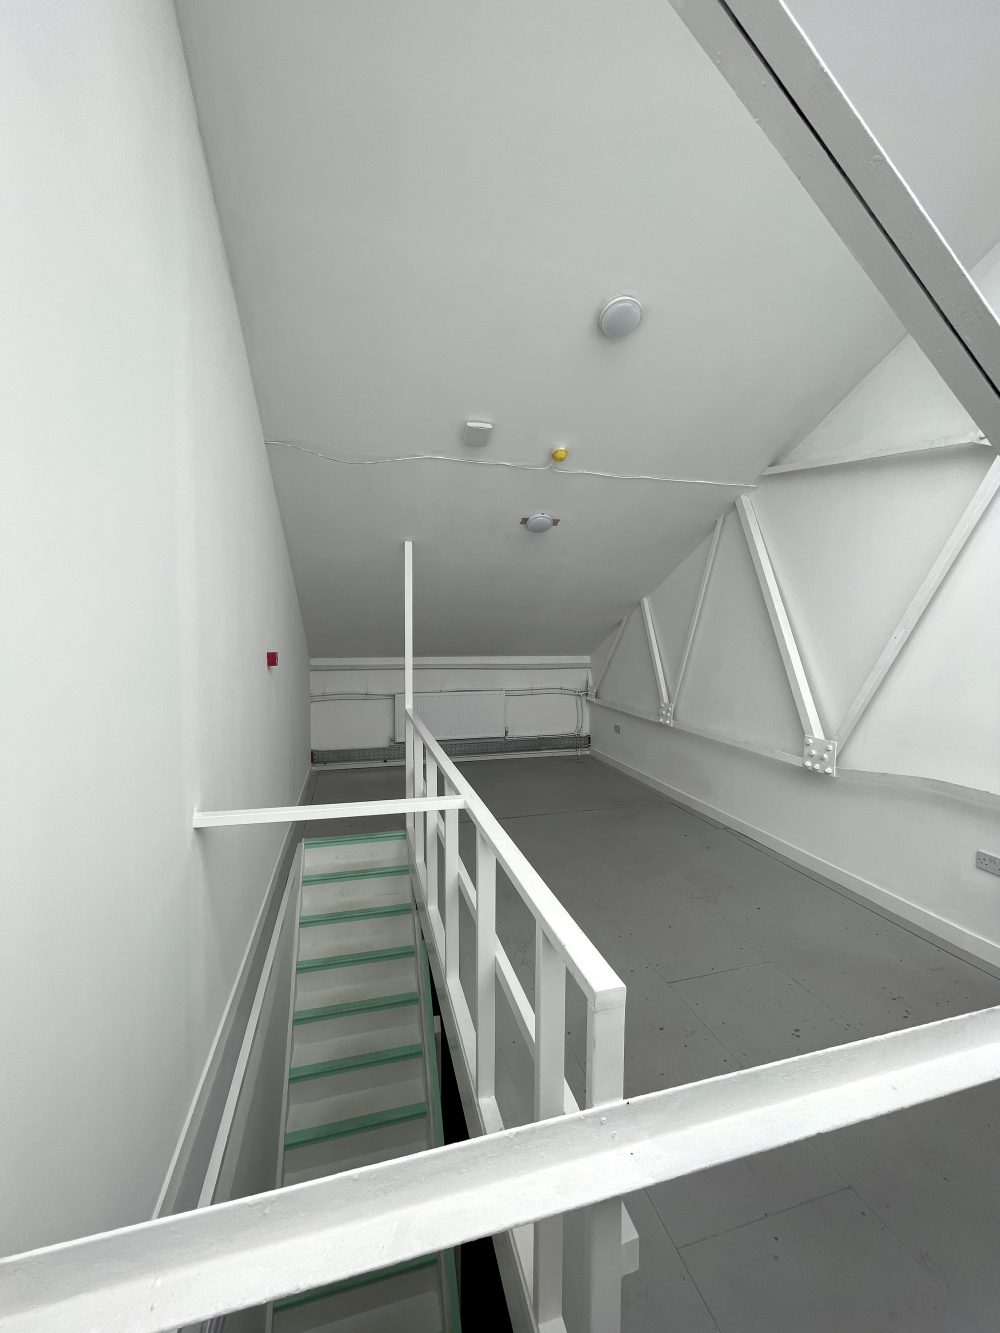 Studio Available to rent in N17 Mill Mead rd U5 Pic10